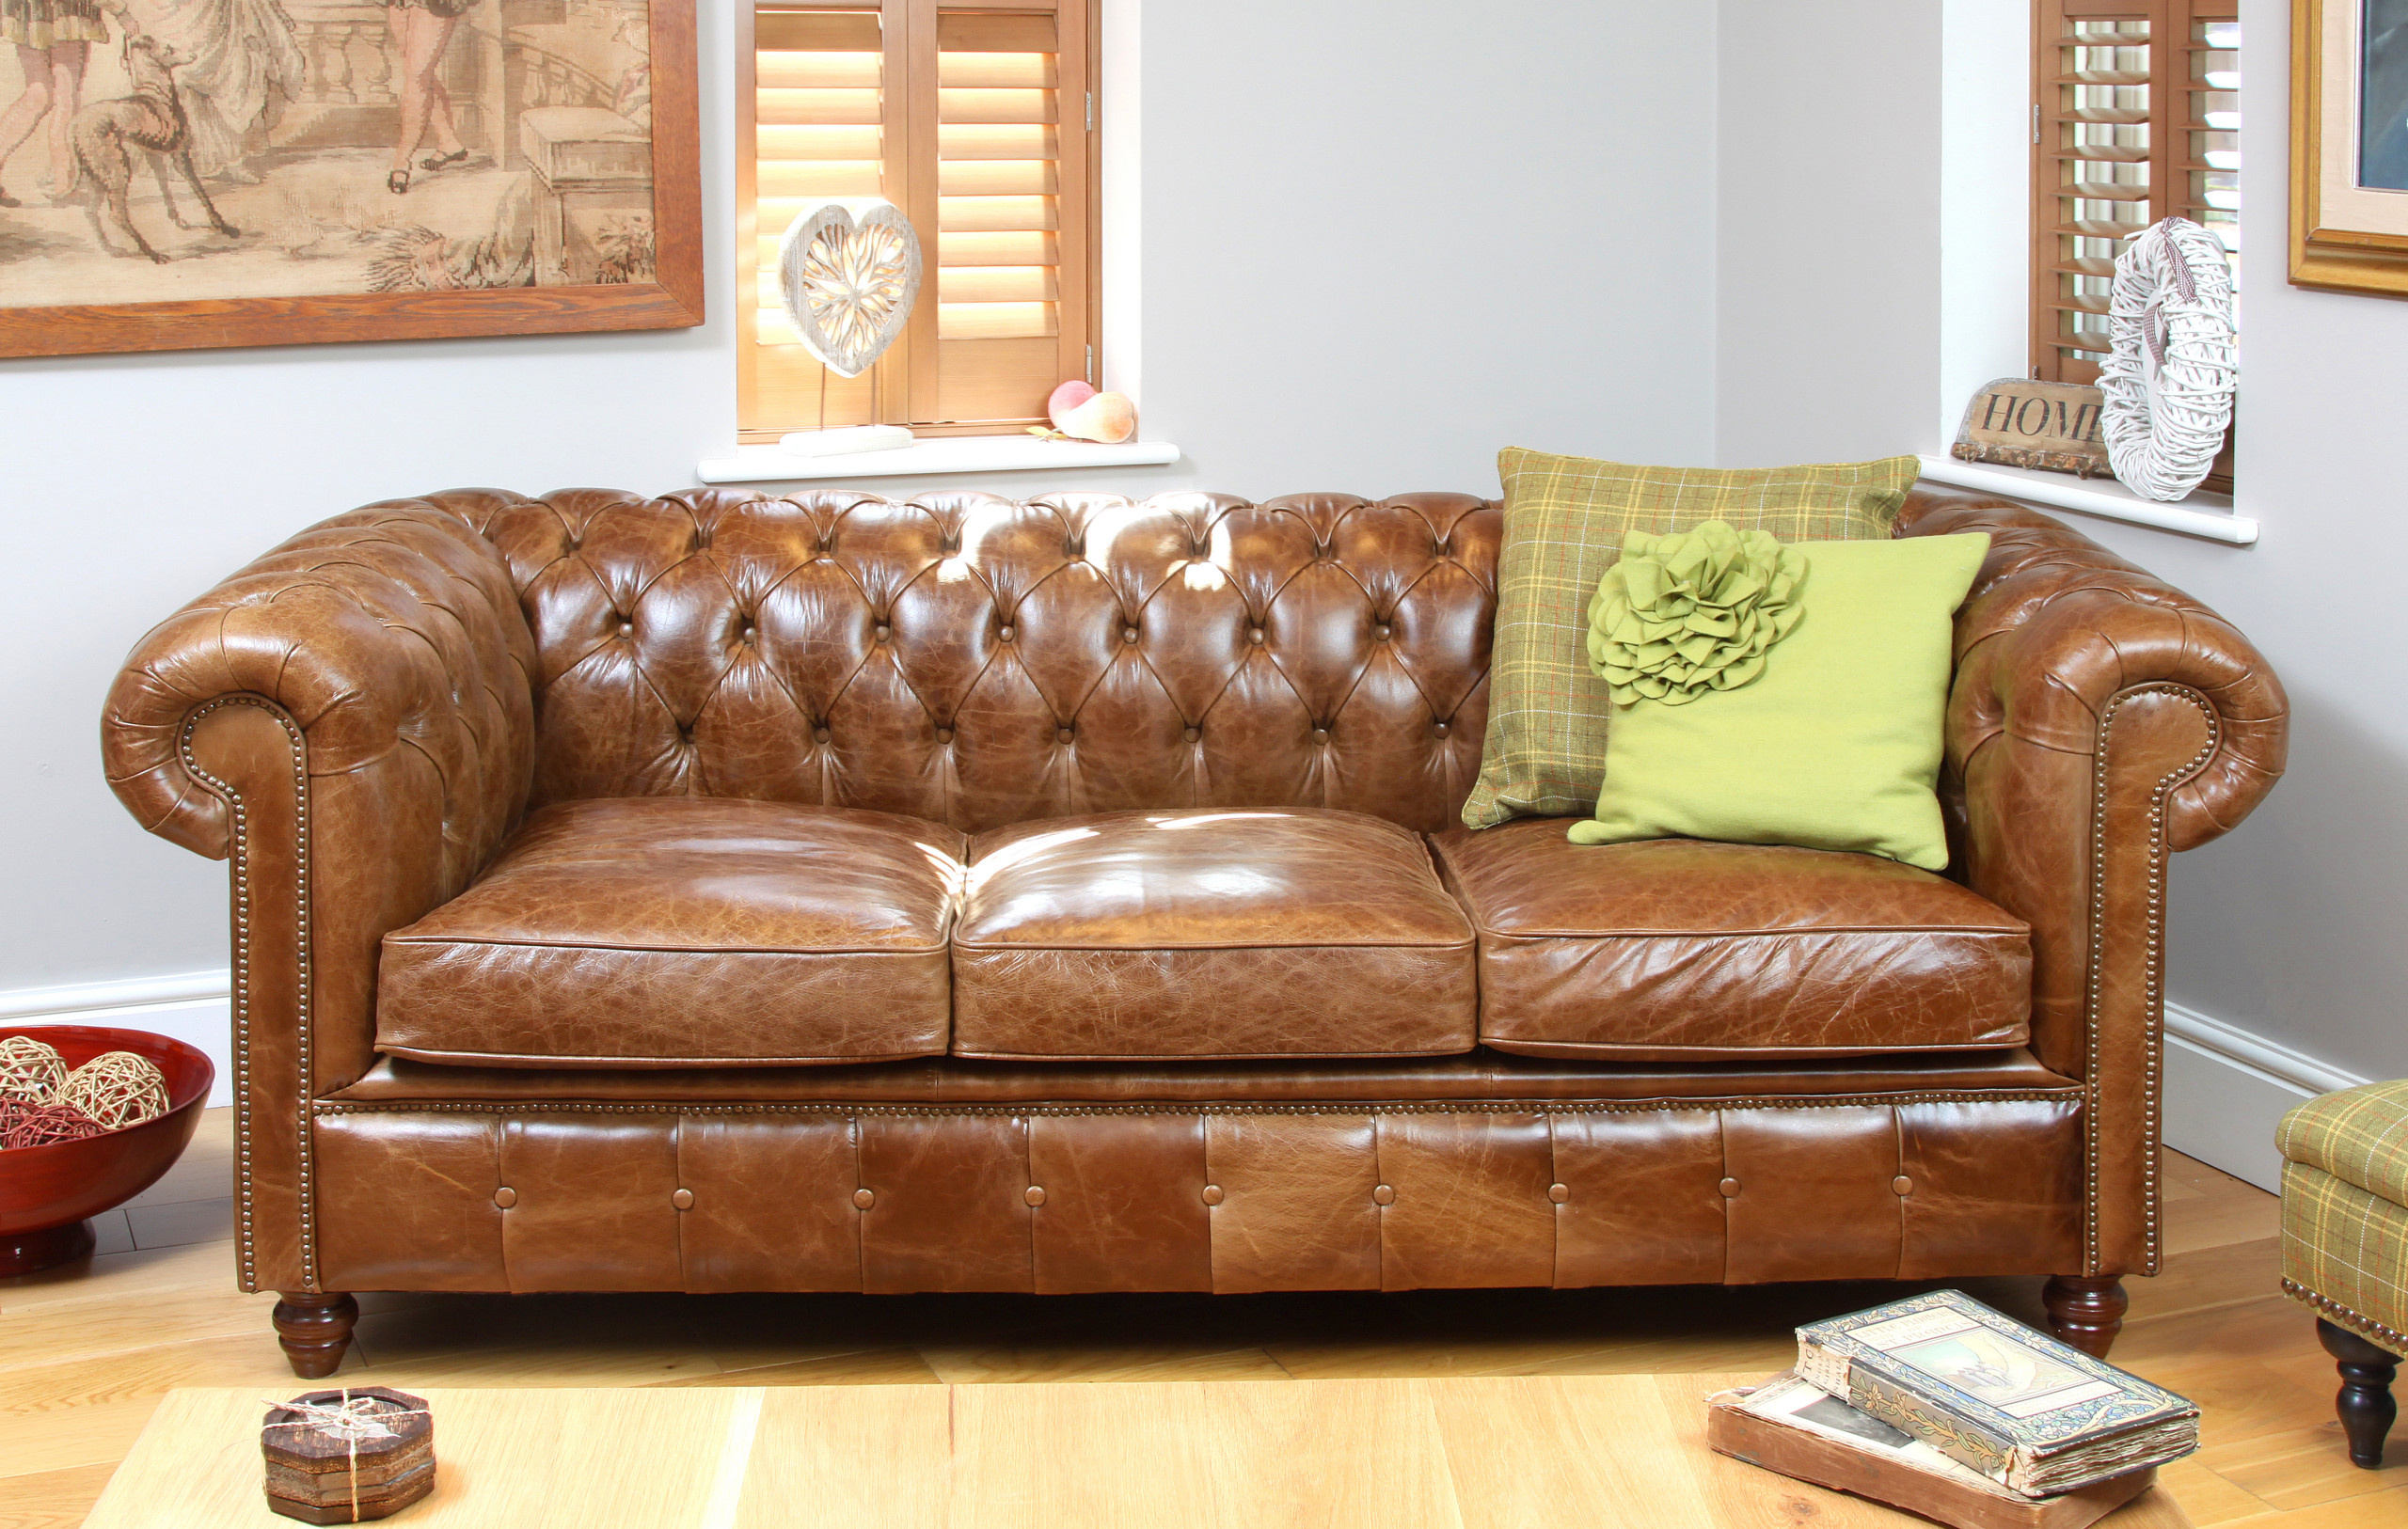 Tan Leather Sofa Bed - Contemporary - Living Room - London - by Old Boot  Sofas | Houzz